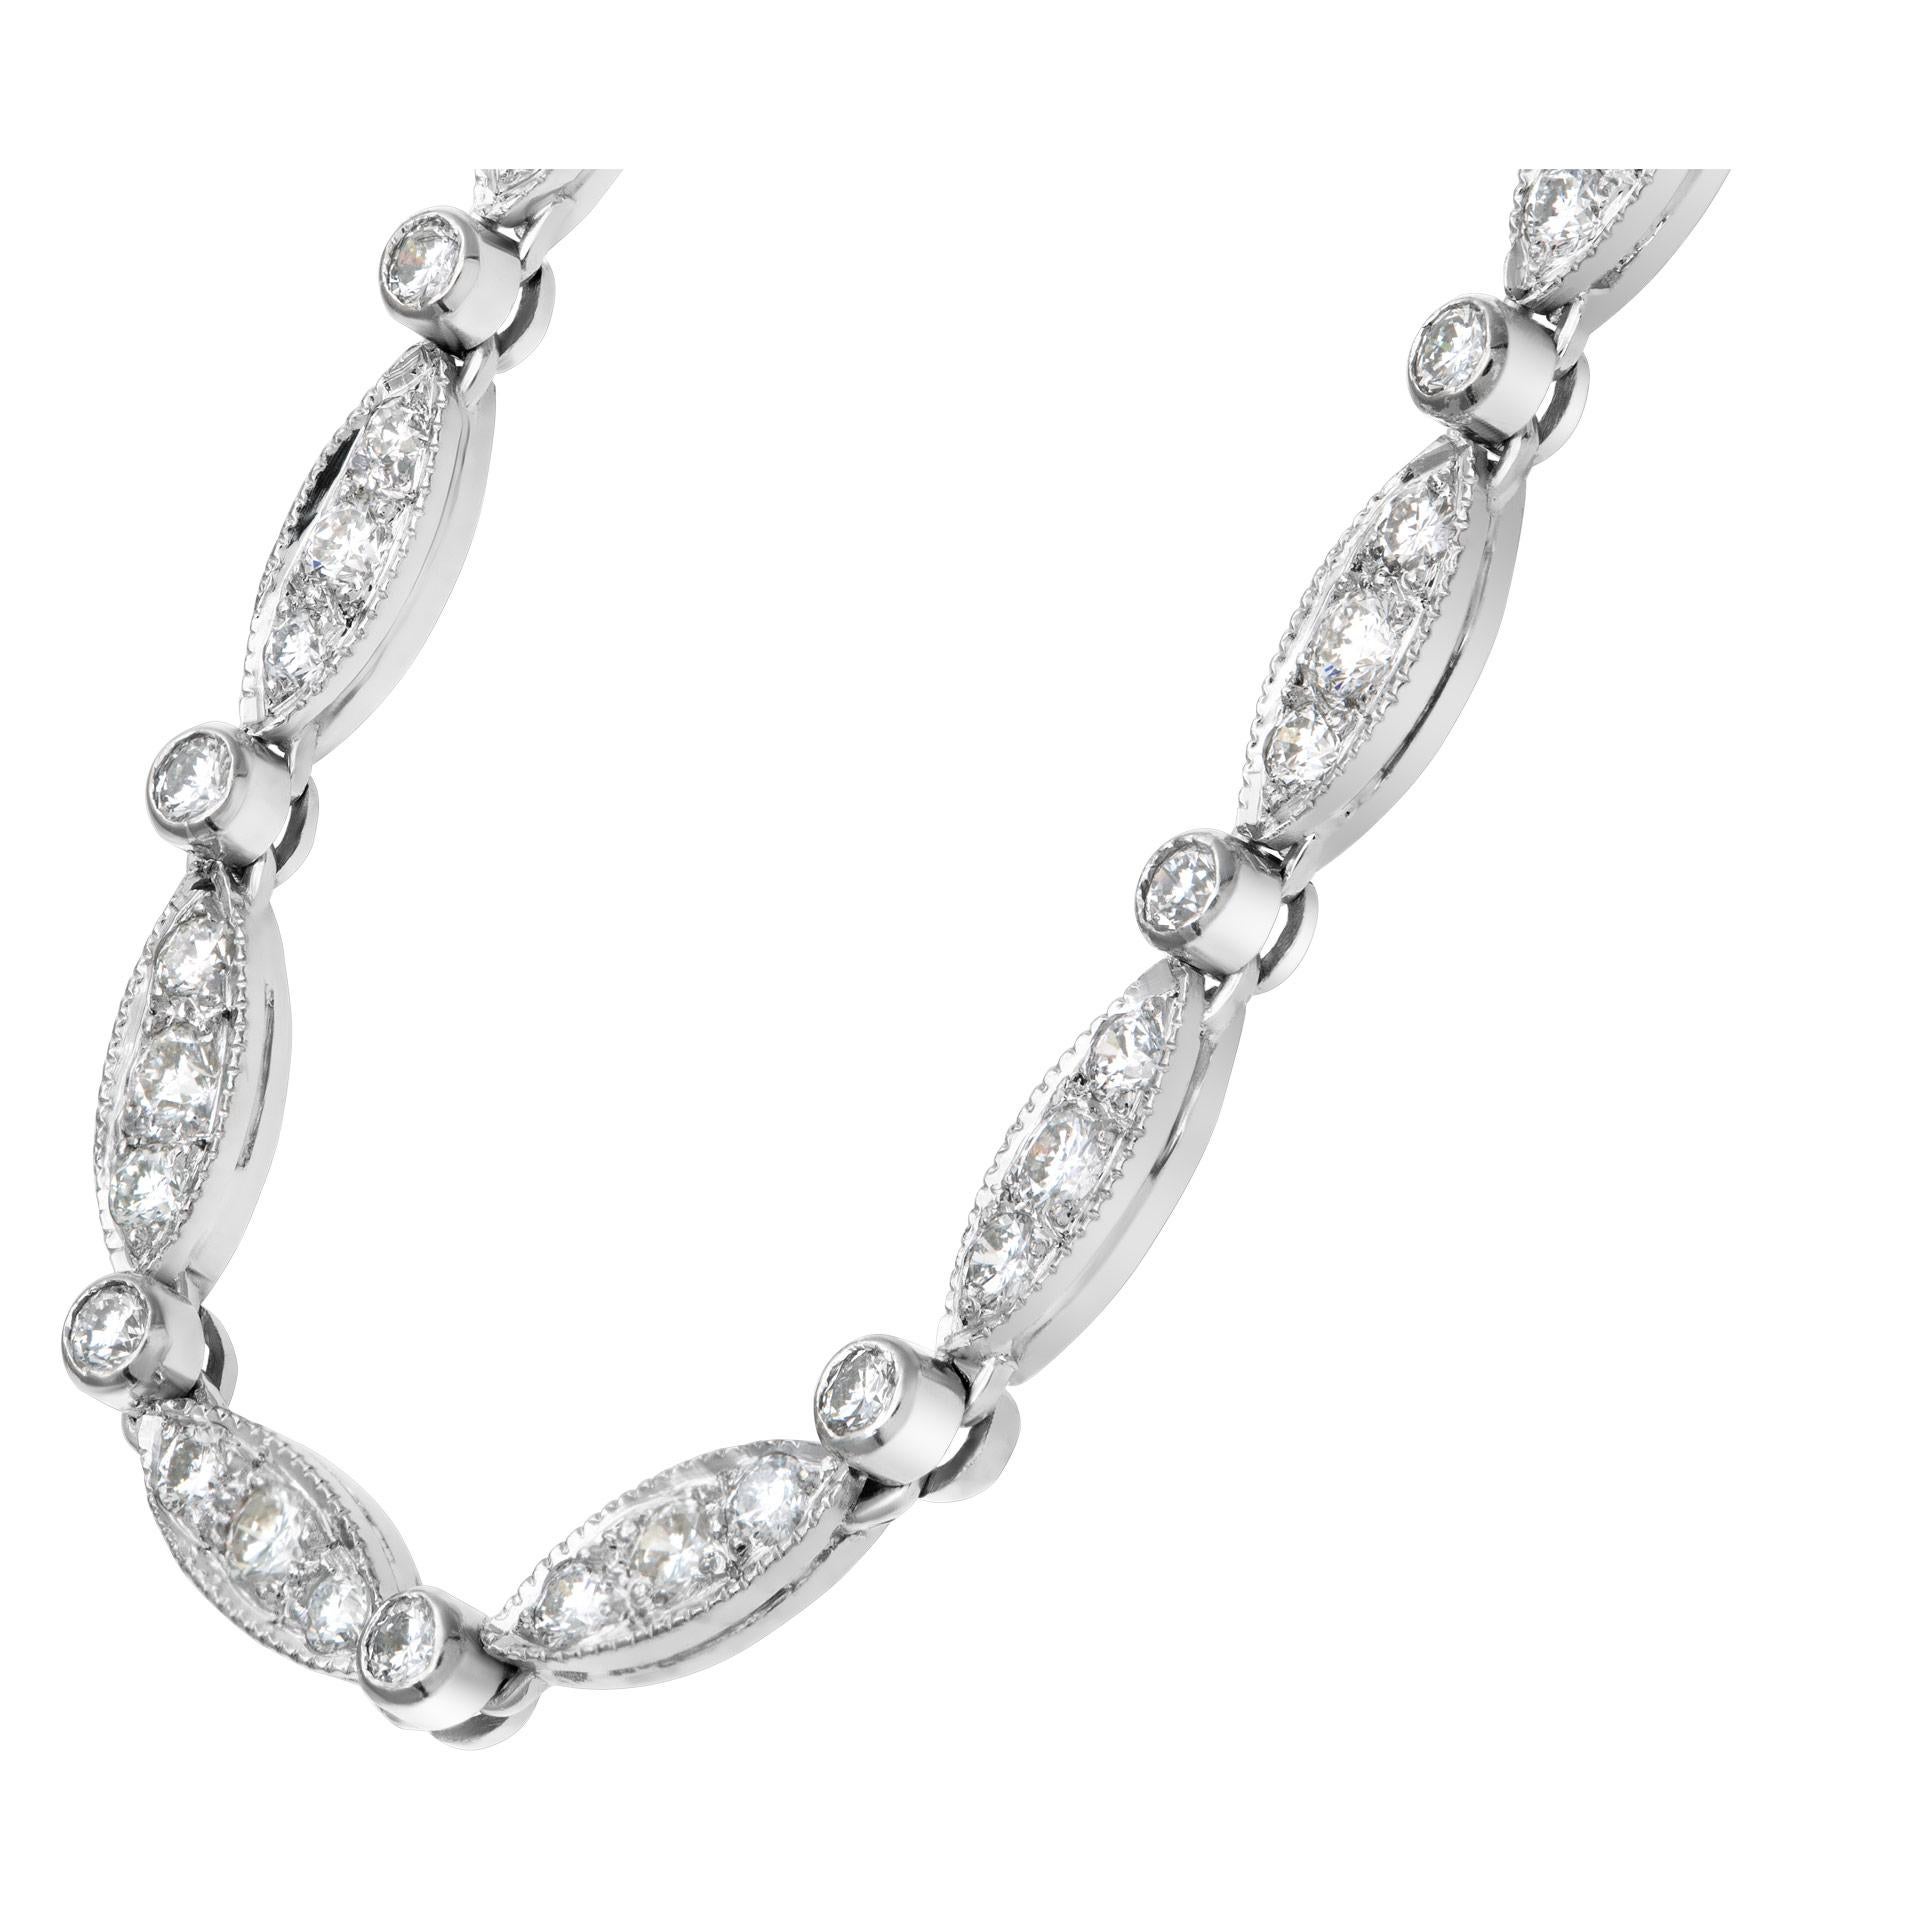 Elegant diamond necklace in 18k white gold with approximately over 2 carats in G-H color, VS-SI clarity diamonds. Length 18.75 inches.